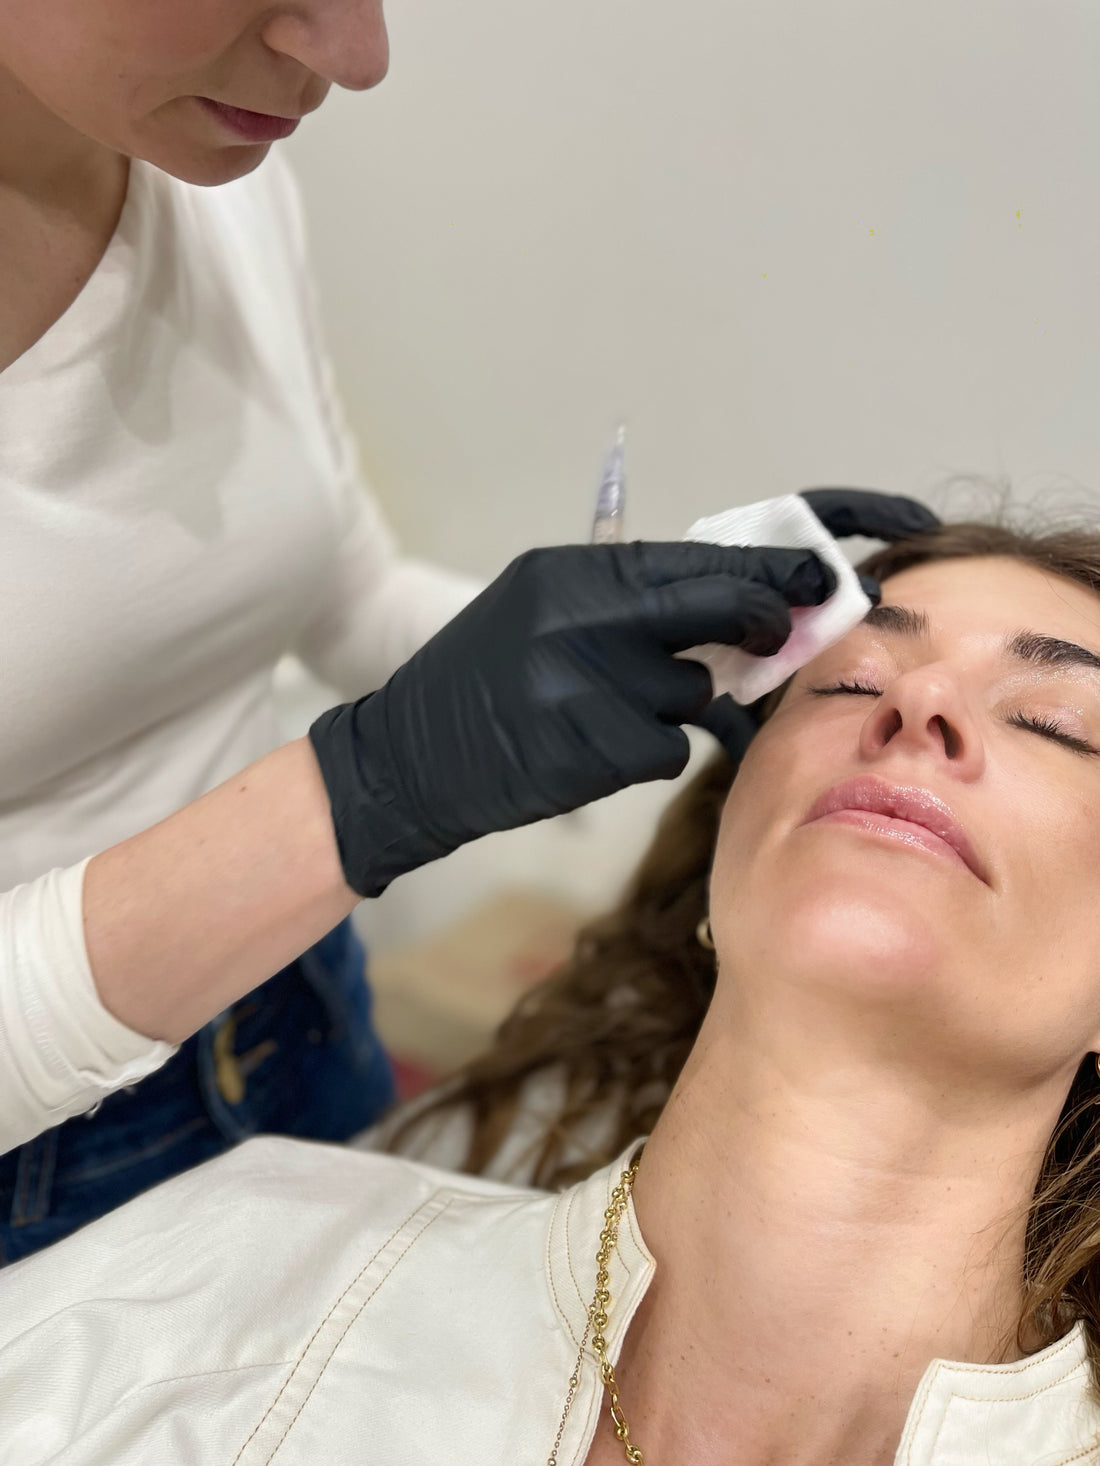 What is Mesotherapy and why do I need it?